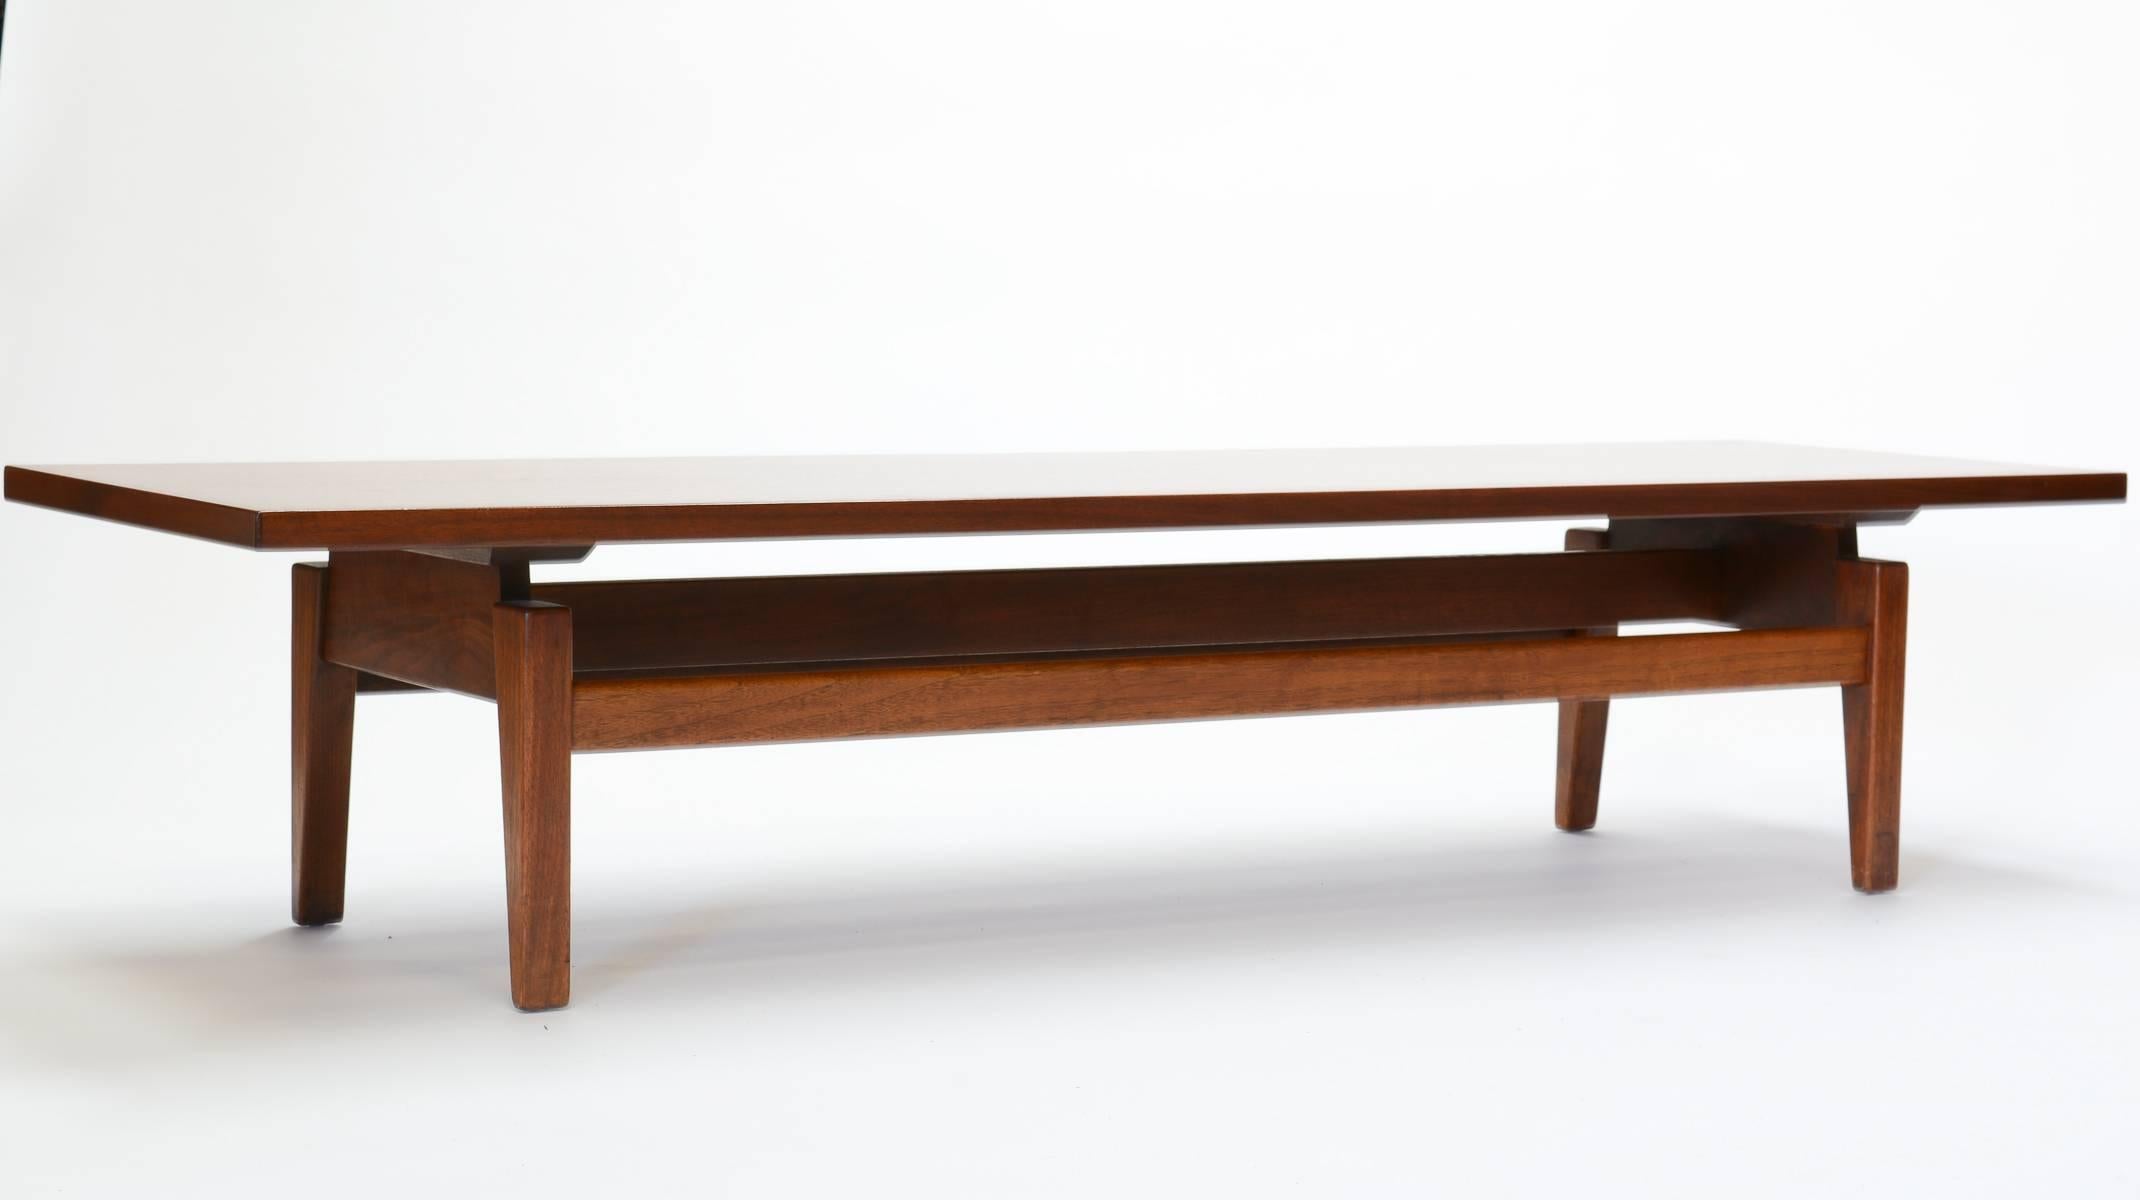 A very large Jens Risom coffee table for Jens Risom Design. The table is from his line that floats on top of the bench and tabletop. Simple and elegant in their design. A fine example from a modern master.